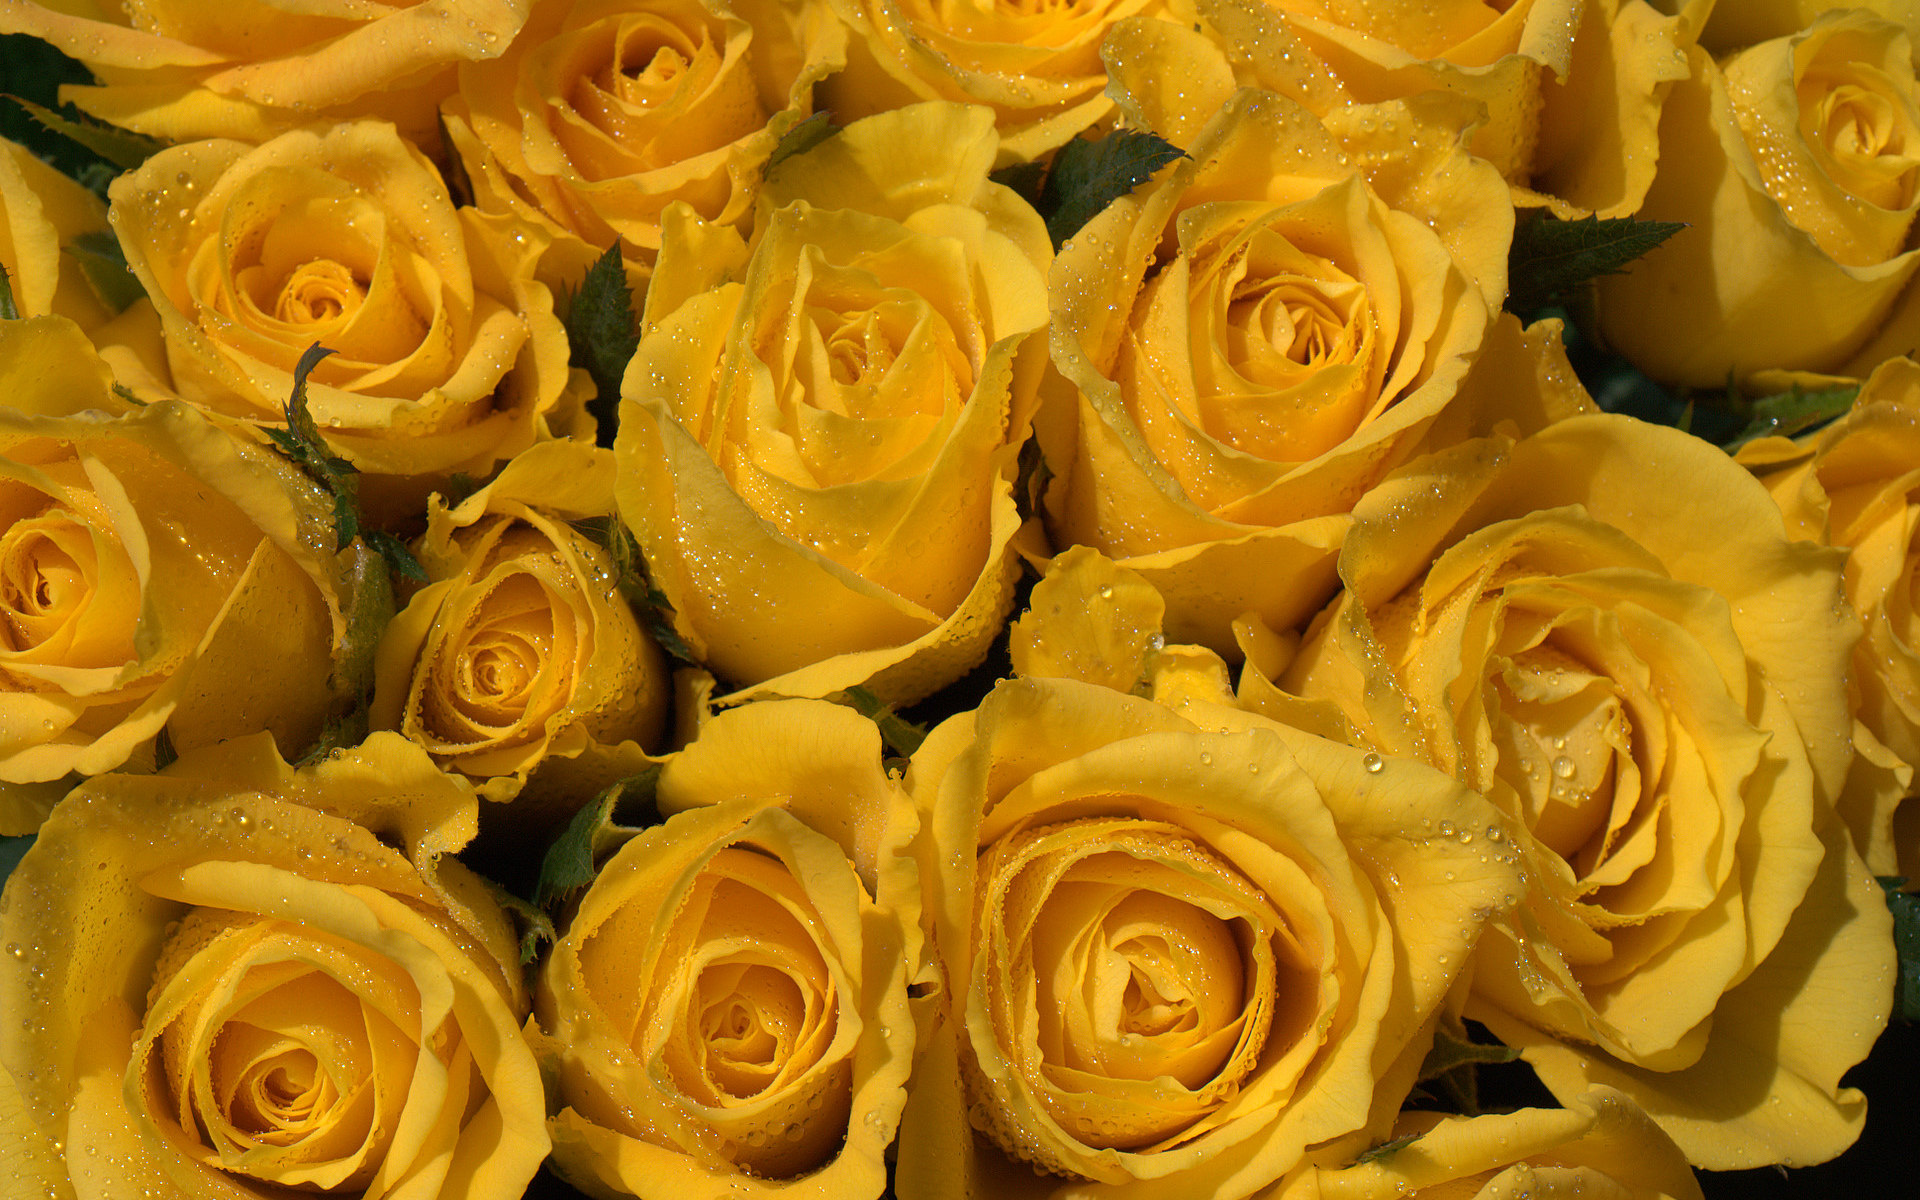 Wallpaper Yellow Wedding Bouquets with Stock: Yellow Roses Wallpaper Viewing Gallery 1920x1200px